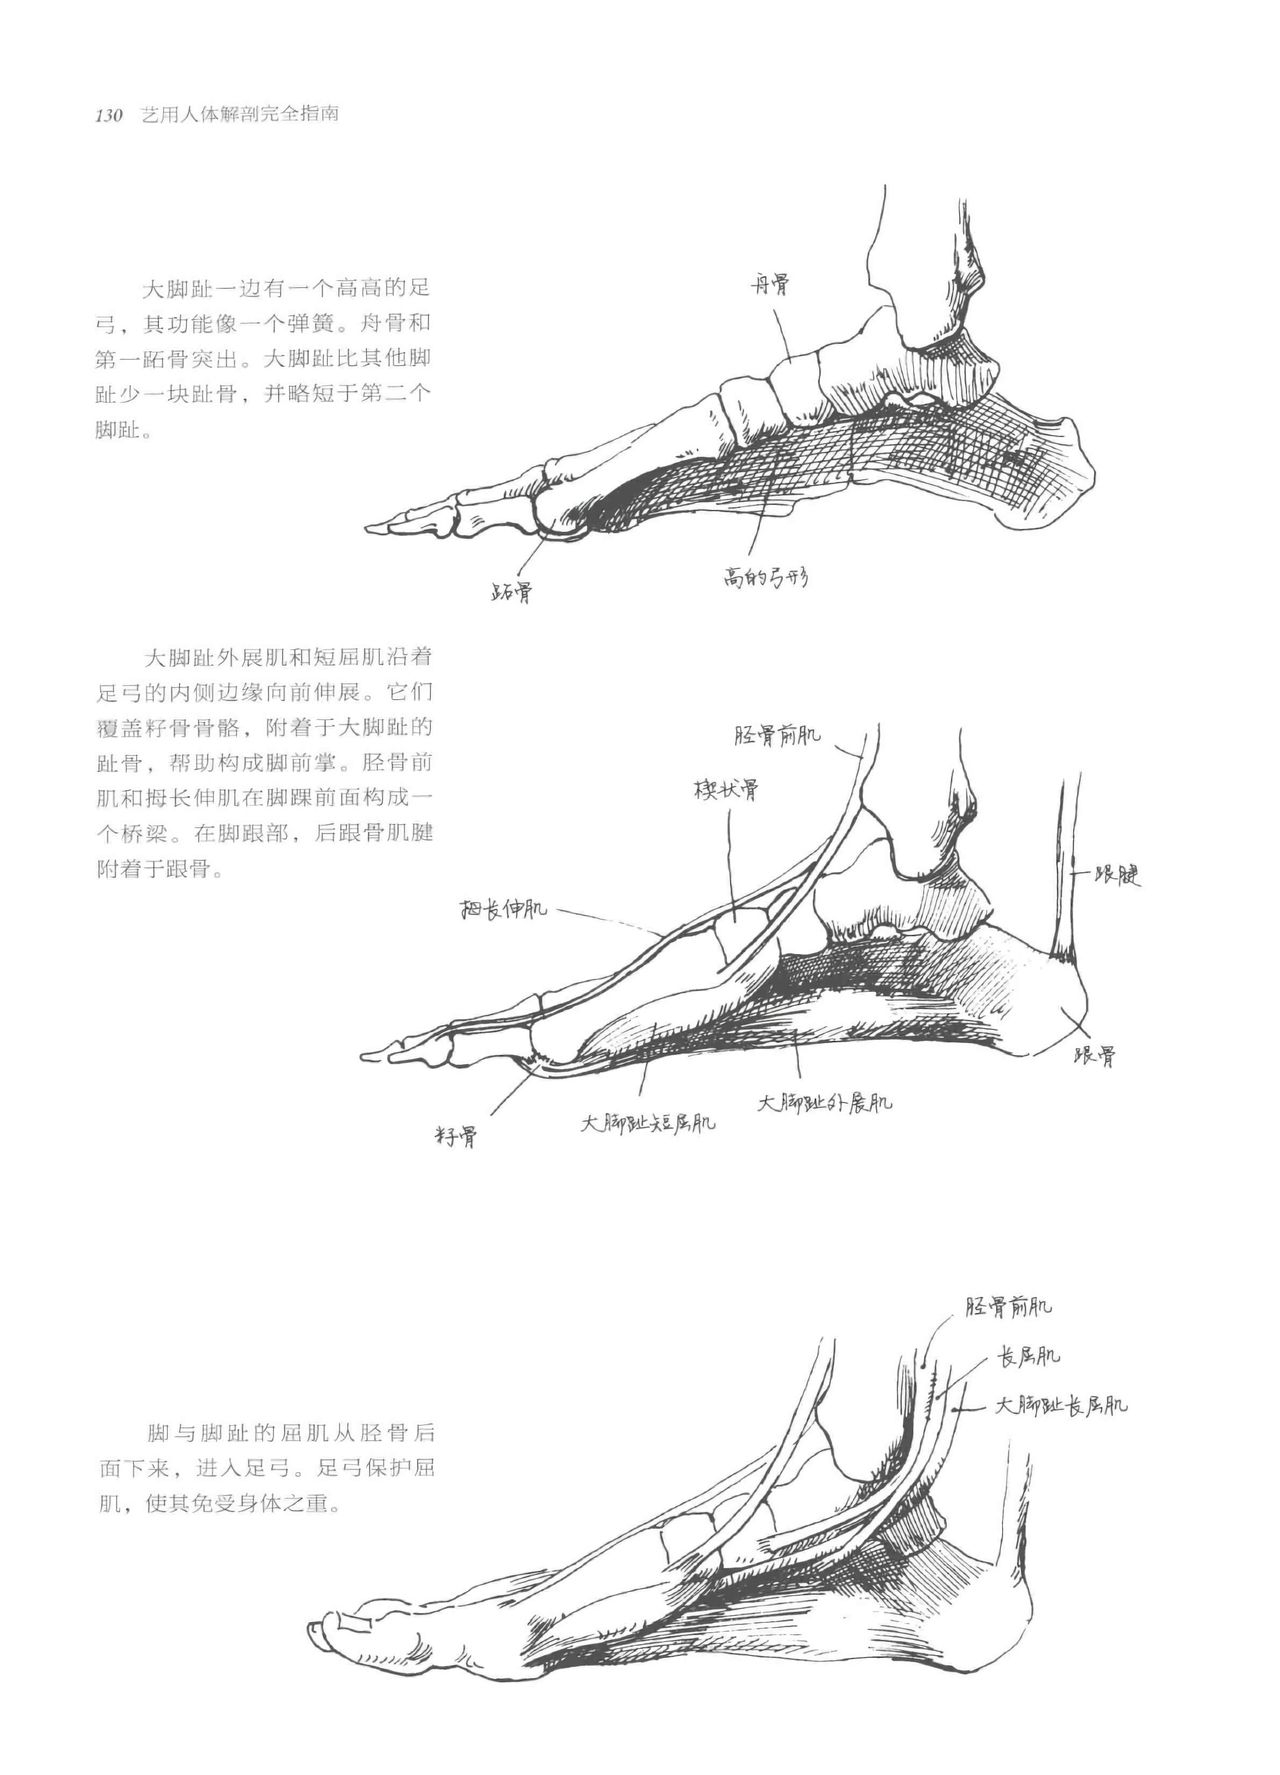 Anatomy-A Complete Guide for Artists - Joseph Sheppard [Chinese] 130